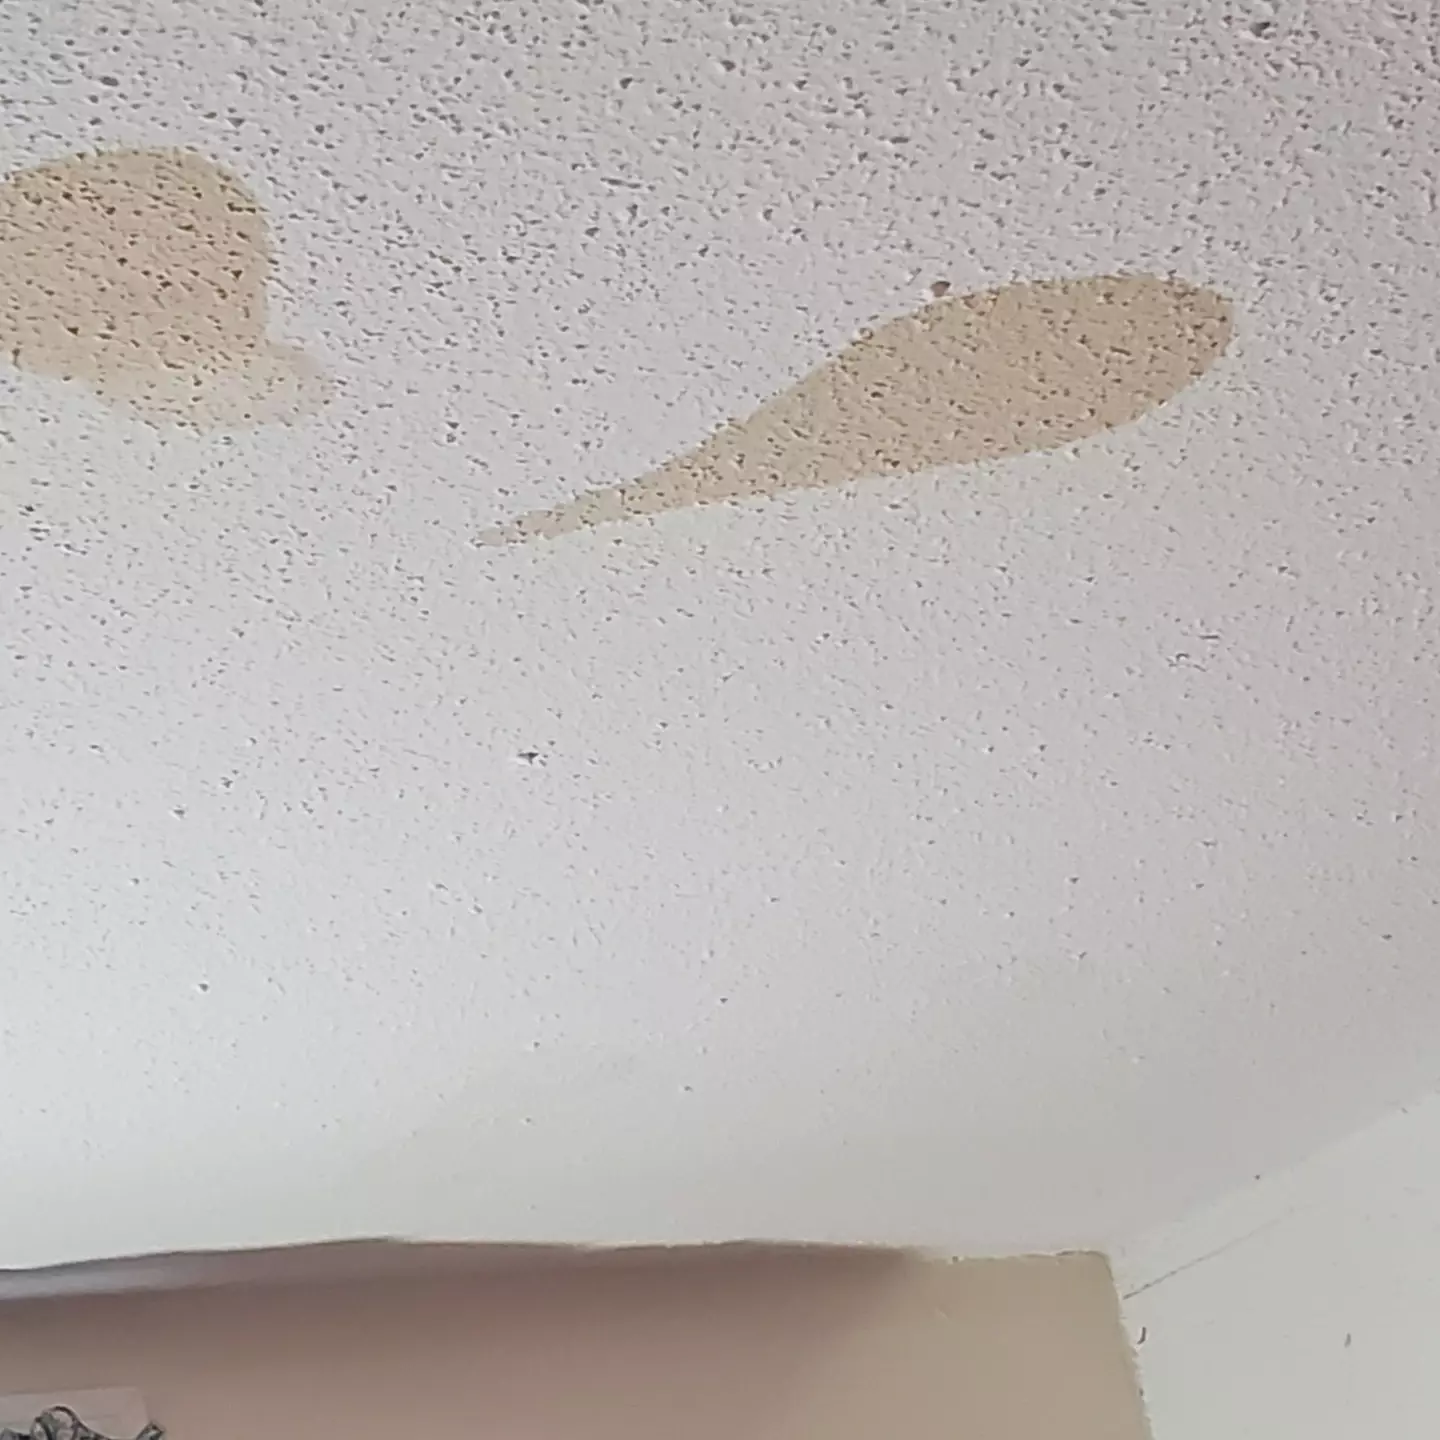 People reckoned they knew the cause of the mystery brown ceiling stains.